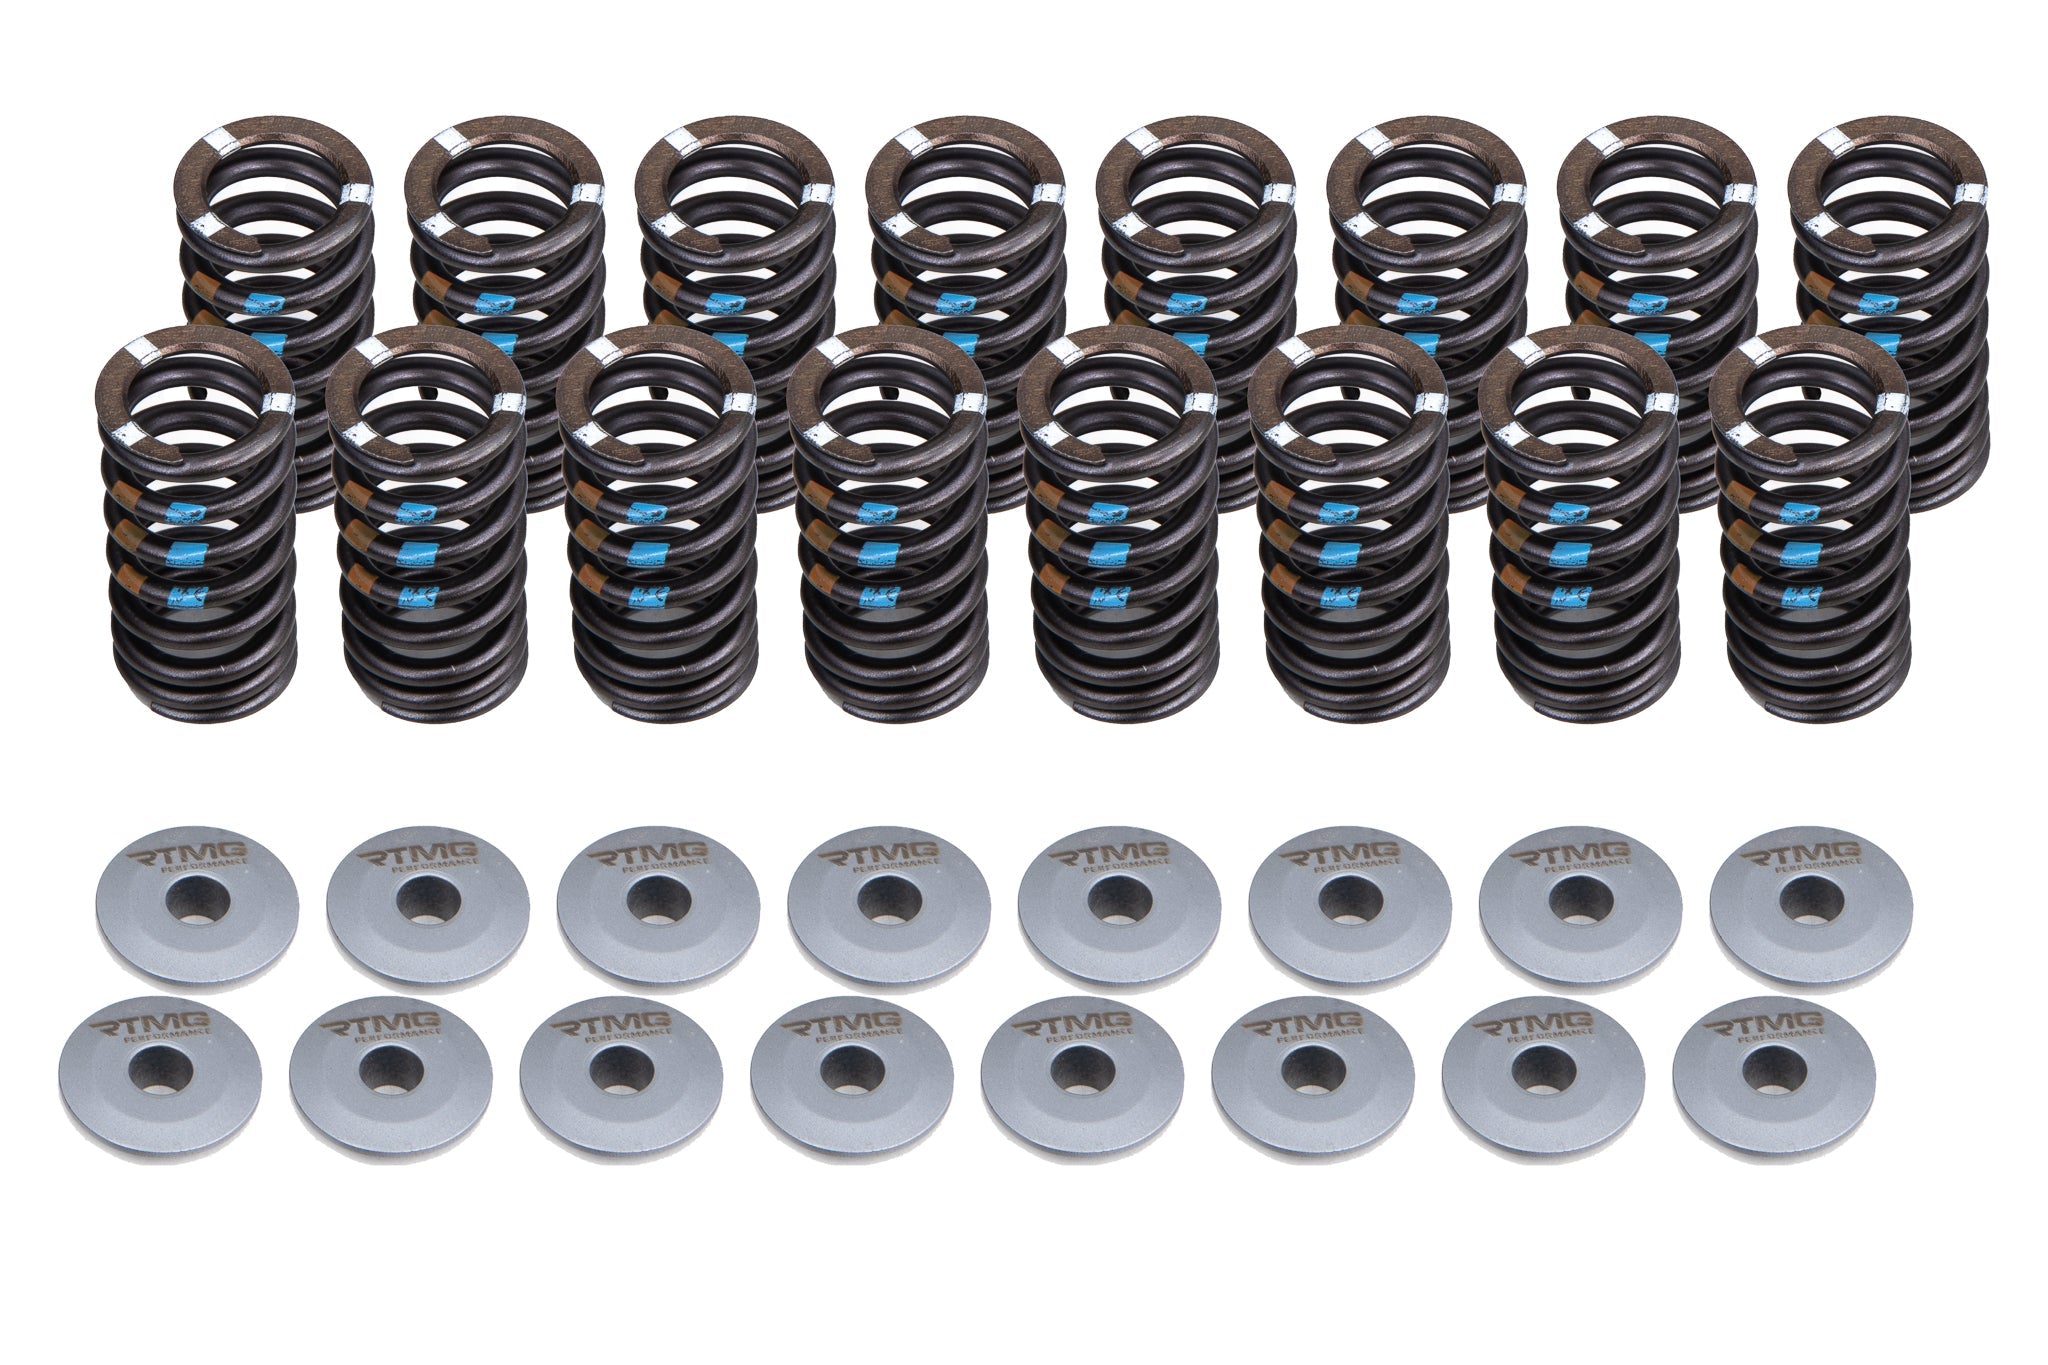 Stiffer Valve Springs with Retainers for 1.4 TSI EA211 - RTMG Performance